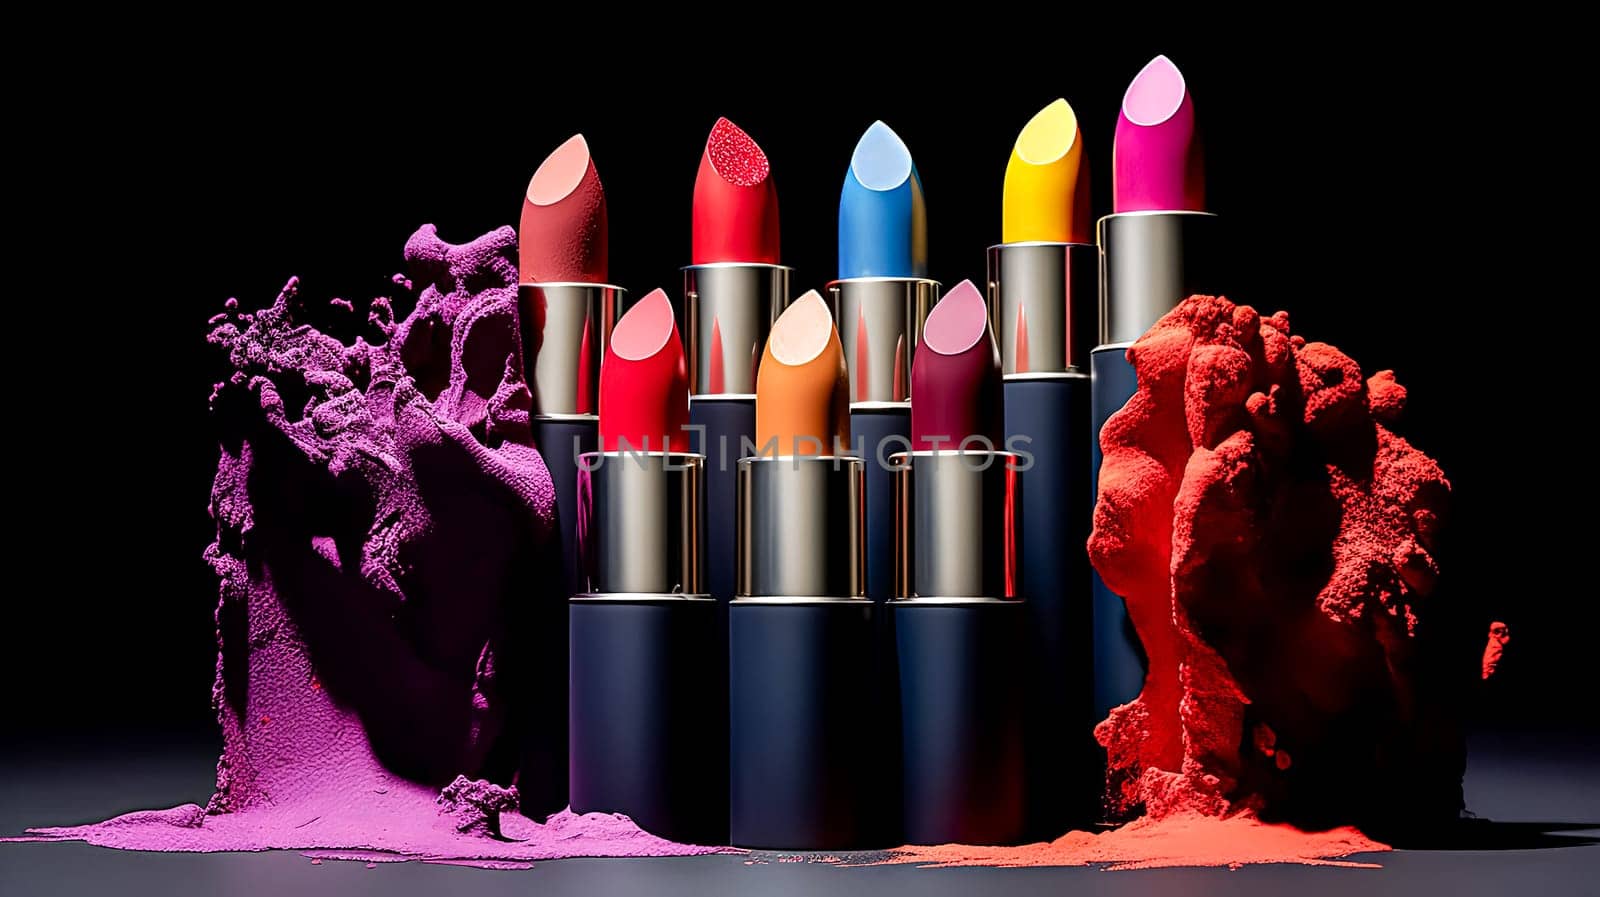 A row of colorful lipsticks are displayed on a table. The lipsticks are arranged in a way that they look like they are melting or spilling out of their containers. Concept of fun and playfulness